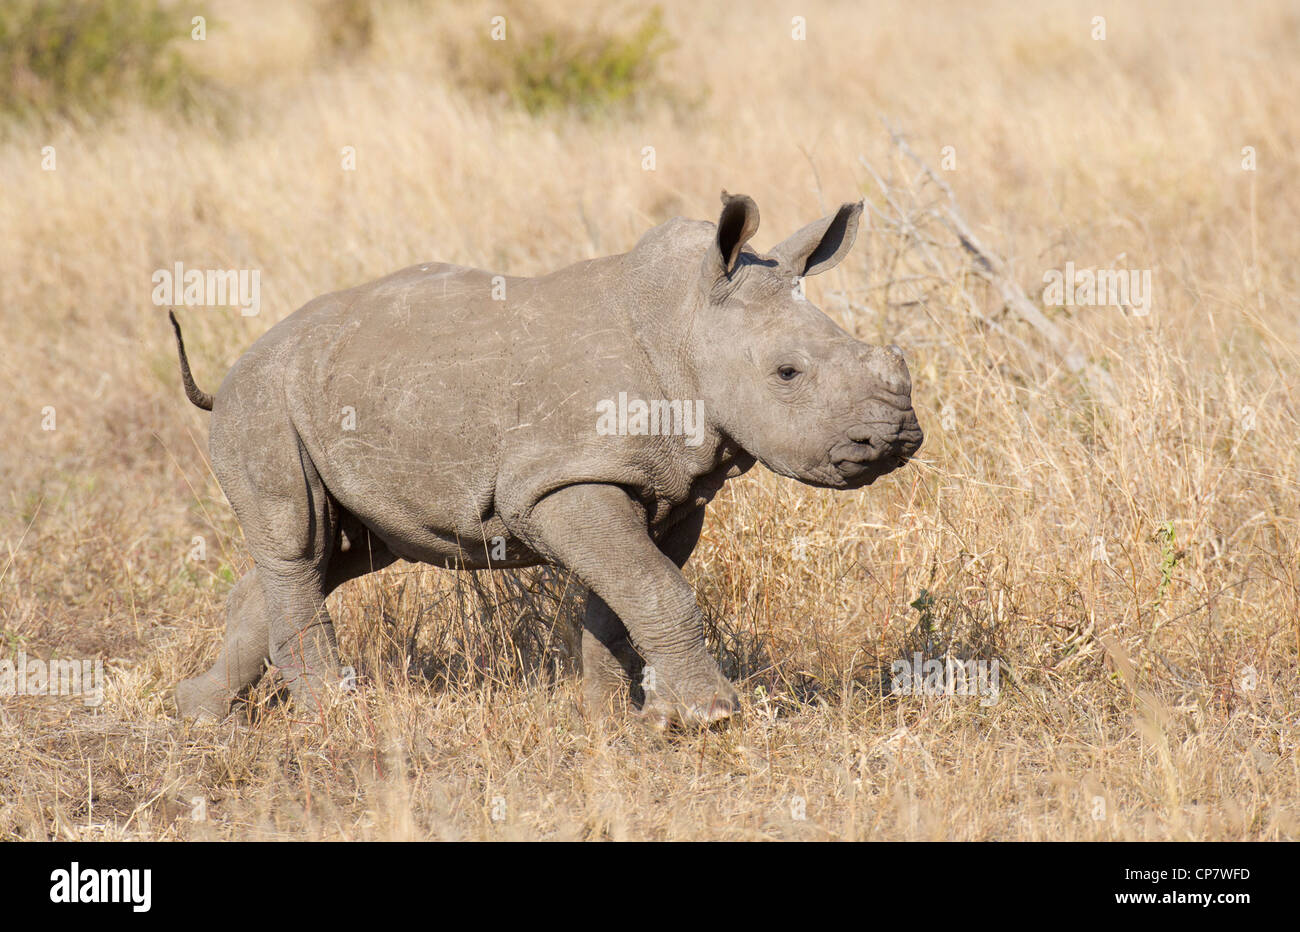 Baby White Rhino, (Ceratotherium simum) in South Africa's Kruger Park Stock Photo